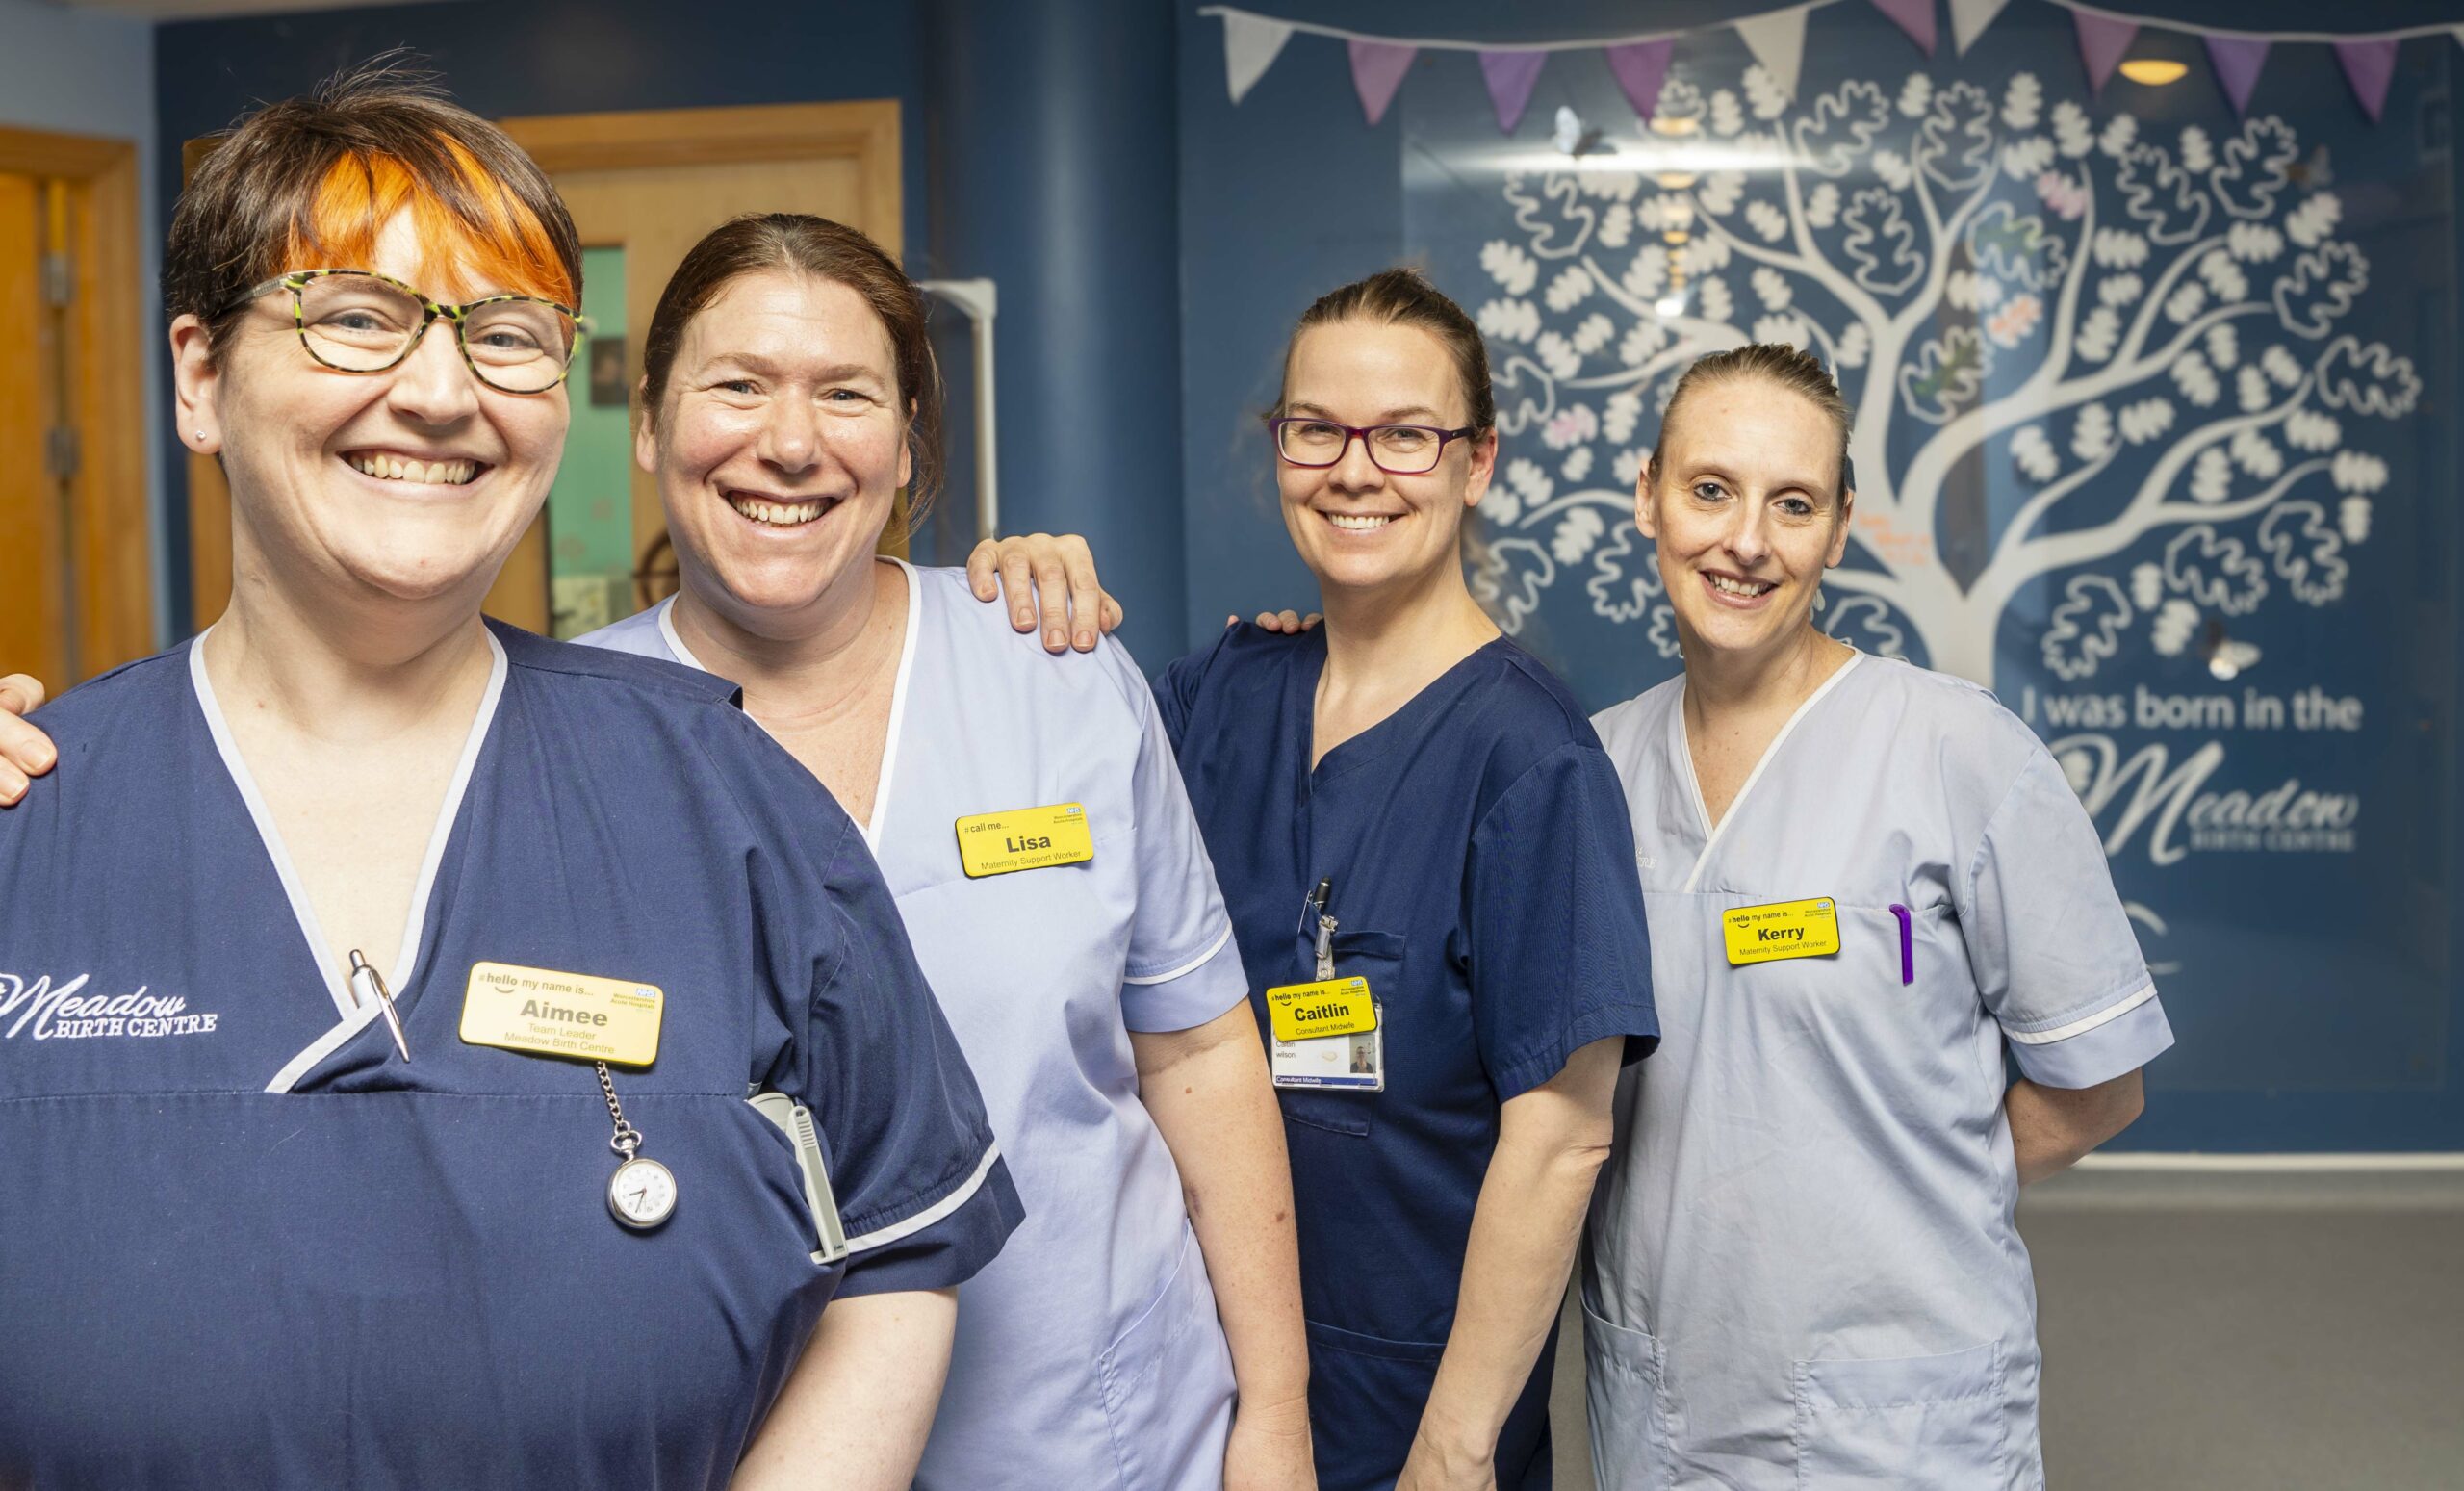 Members of the Meadow Birth Centre team at Worcestershire Royal Hospital.